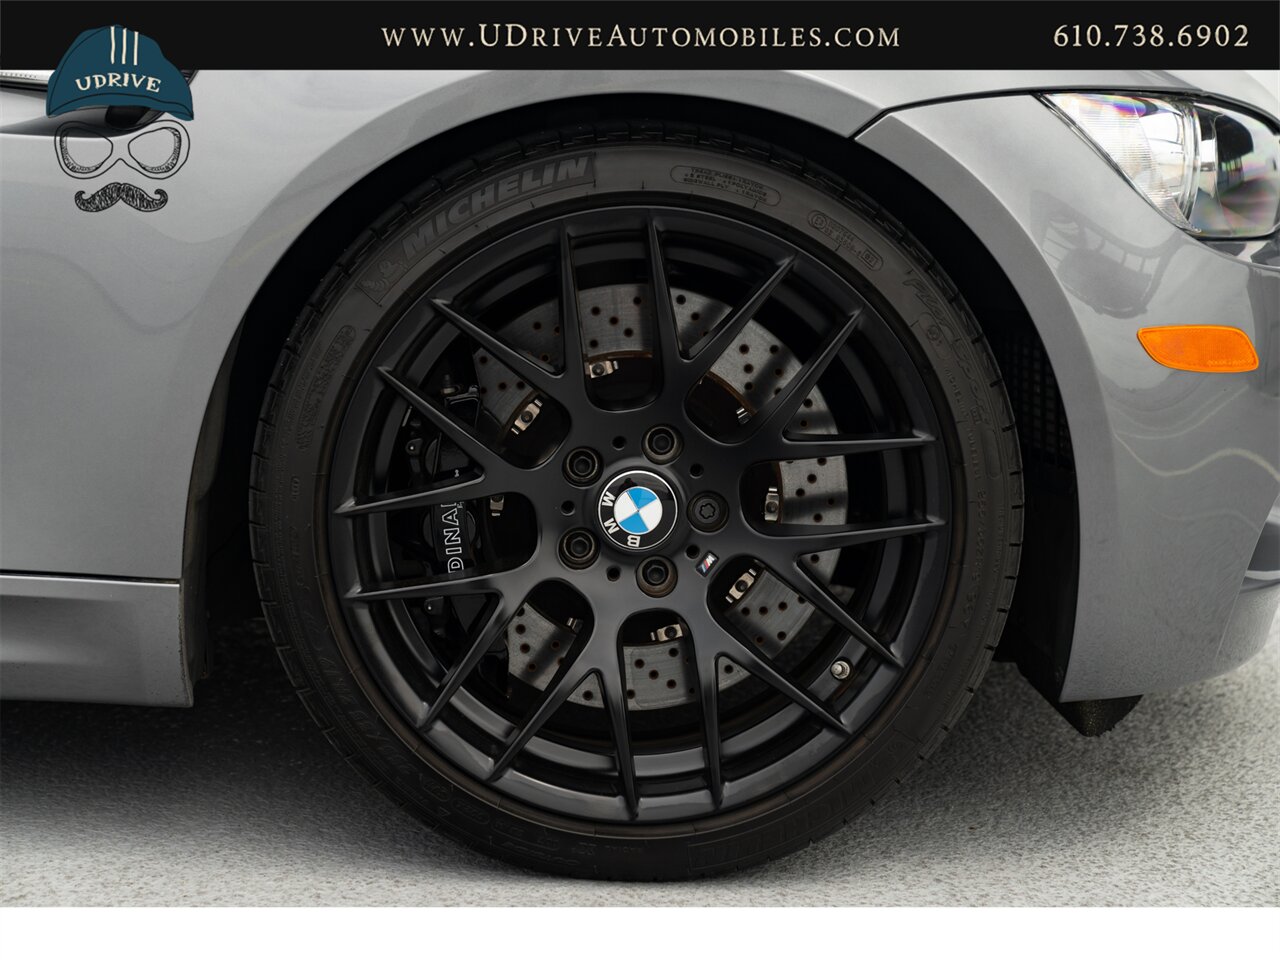 2012 BMW M3 E92 6 Speed 7k Miles Dinan Upgrades  GTS/359 Wheels Carbon Fiber Roof - Photo 57 - West Chester, PA 19382